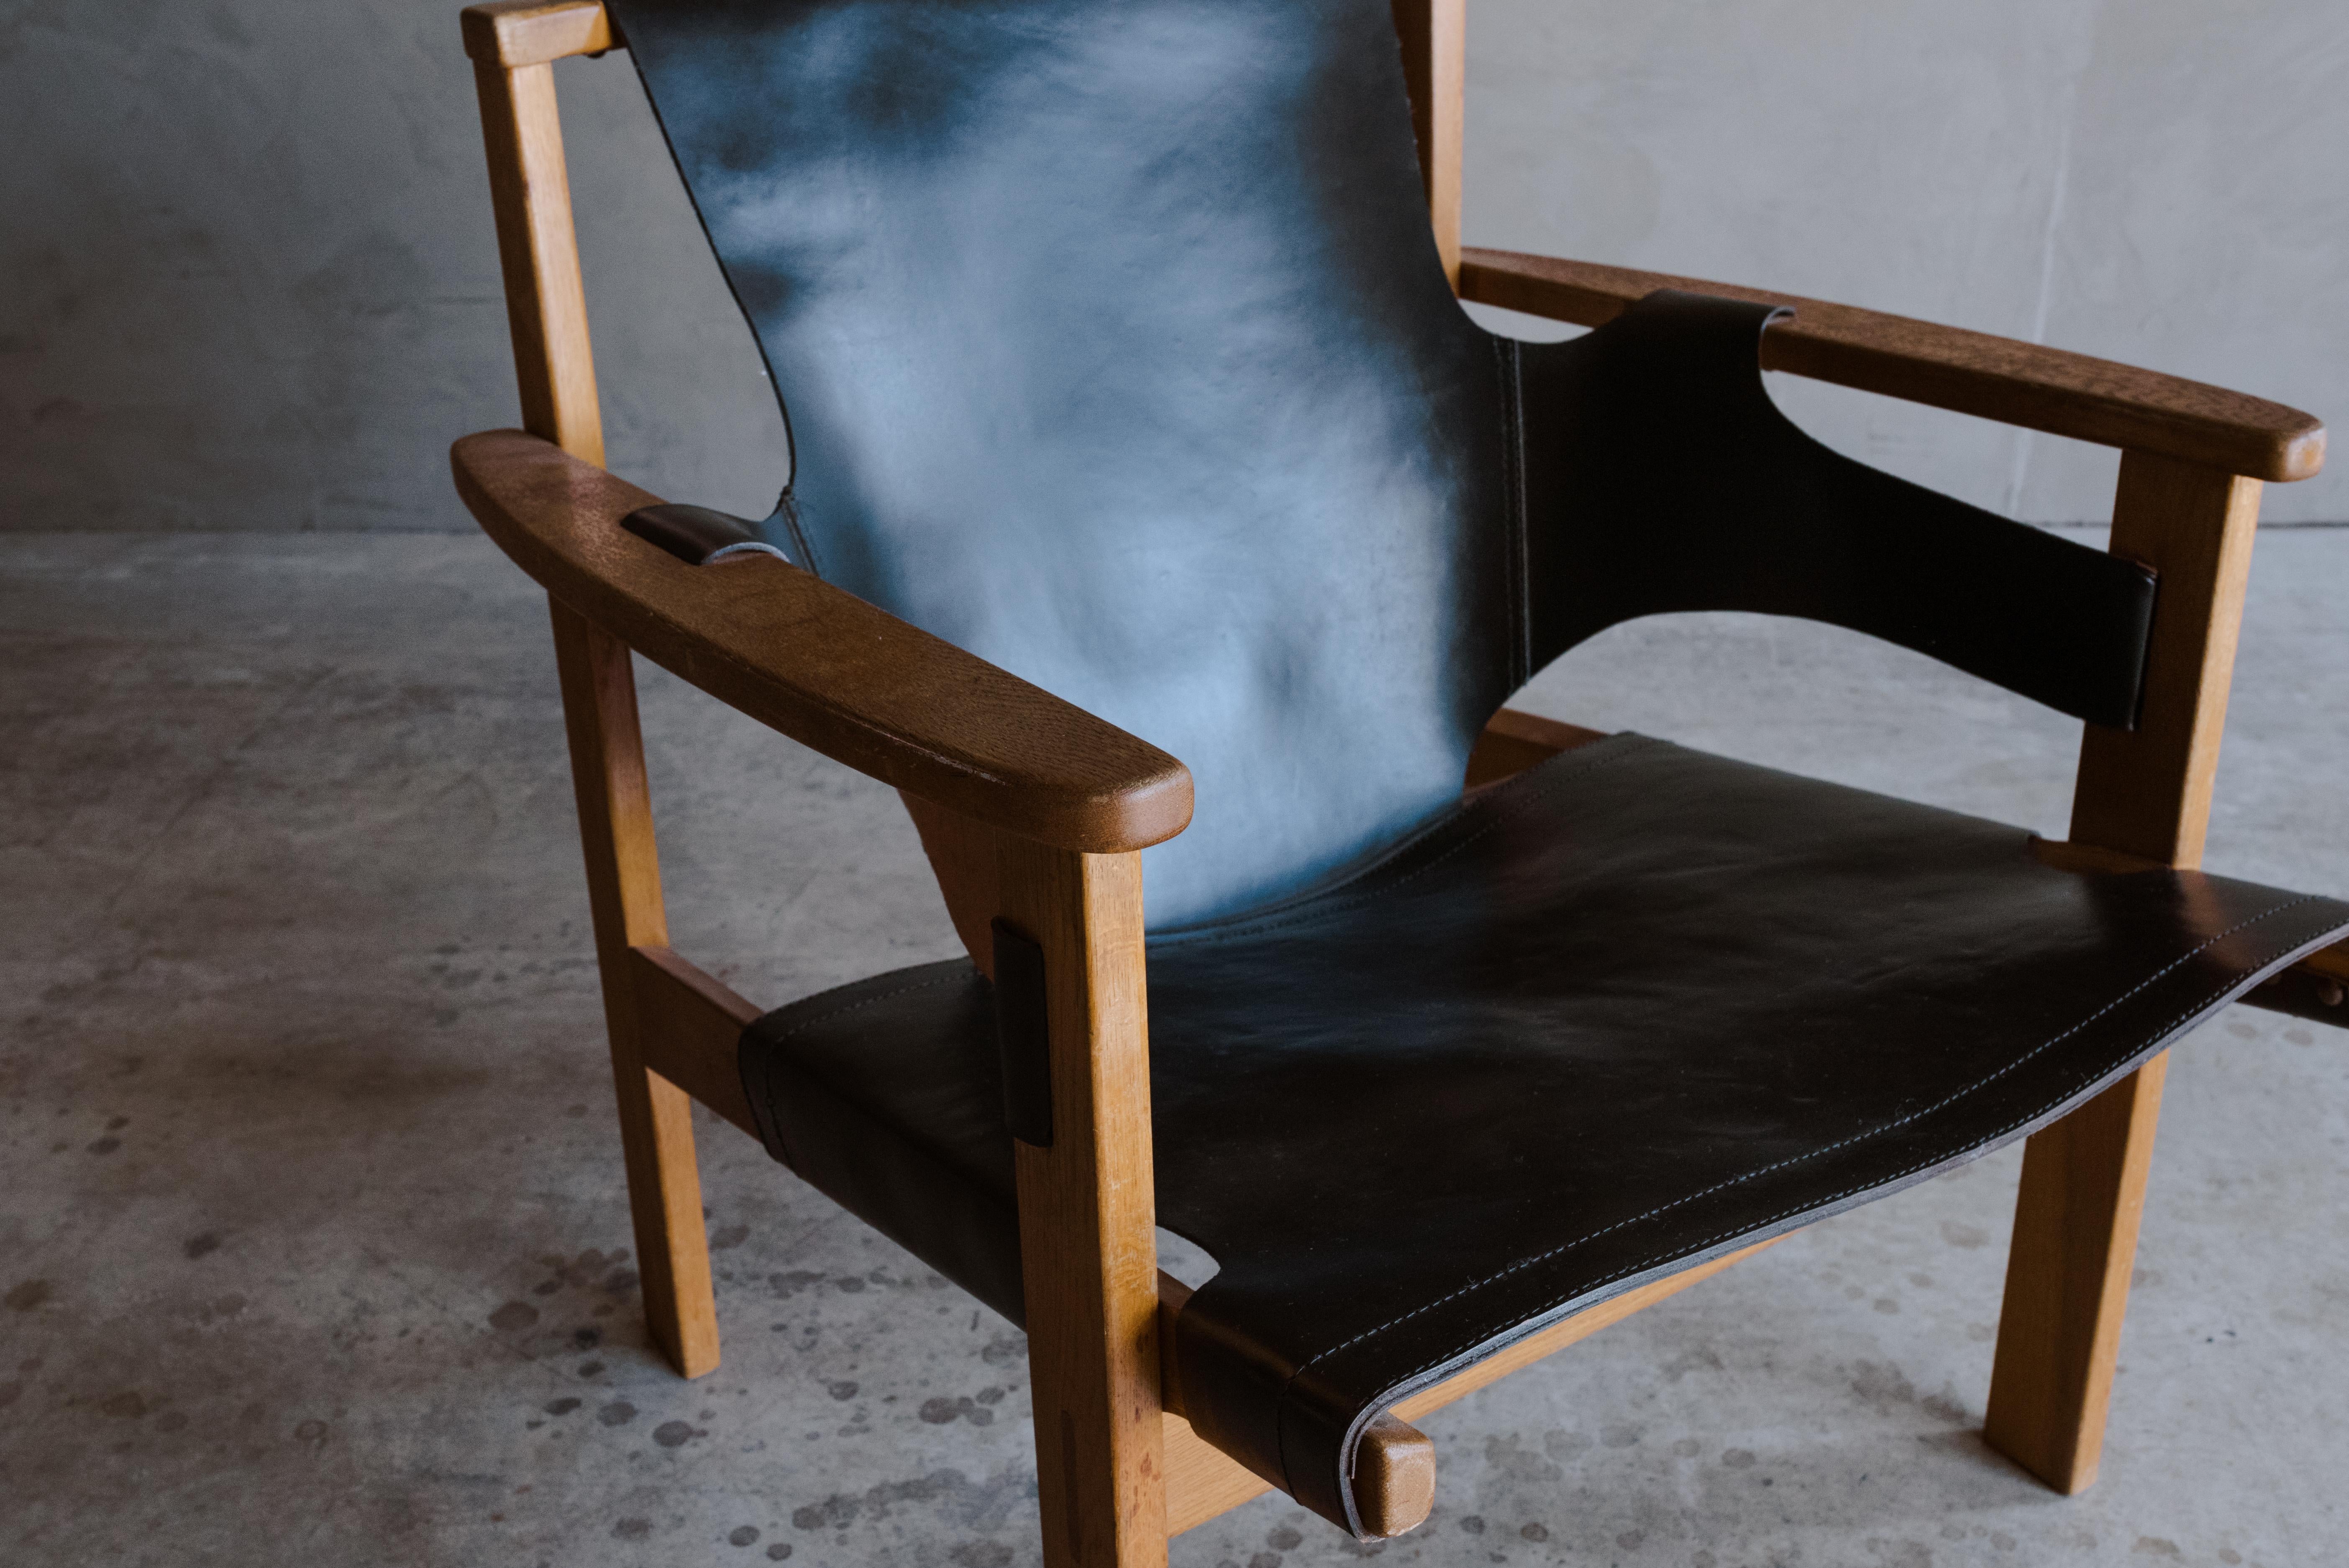 Vintage Carl-Axel Acking chair for NK 'Nordiska Kompaniet', model 'Trienna', Circa 1960. Solid oak frame with stretched black leather. Light wear and use.